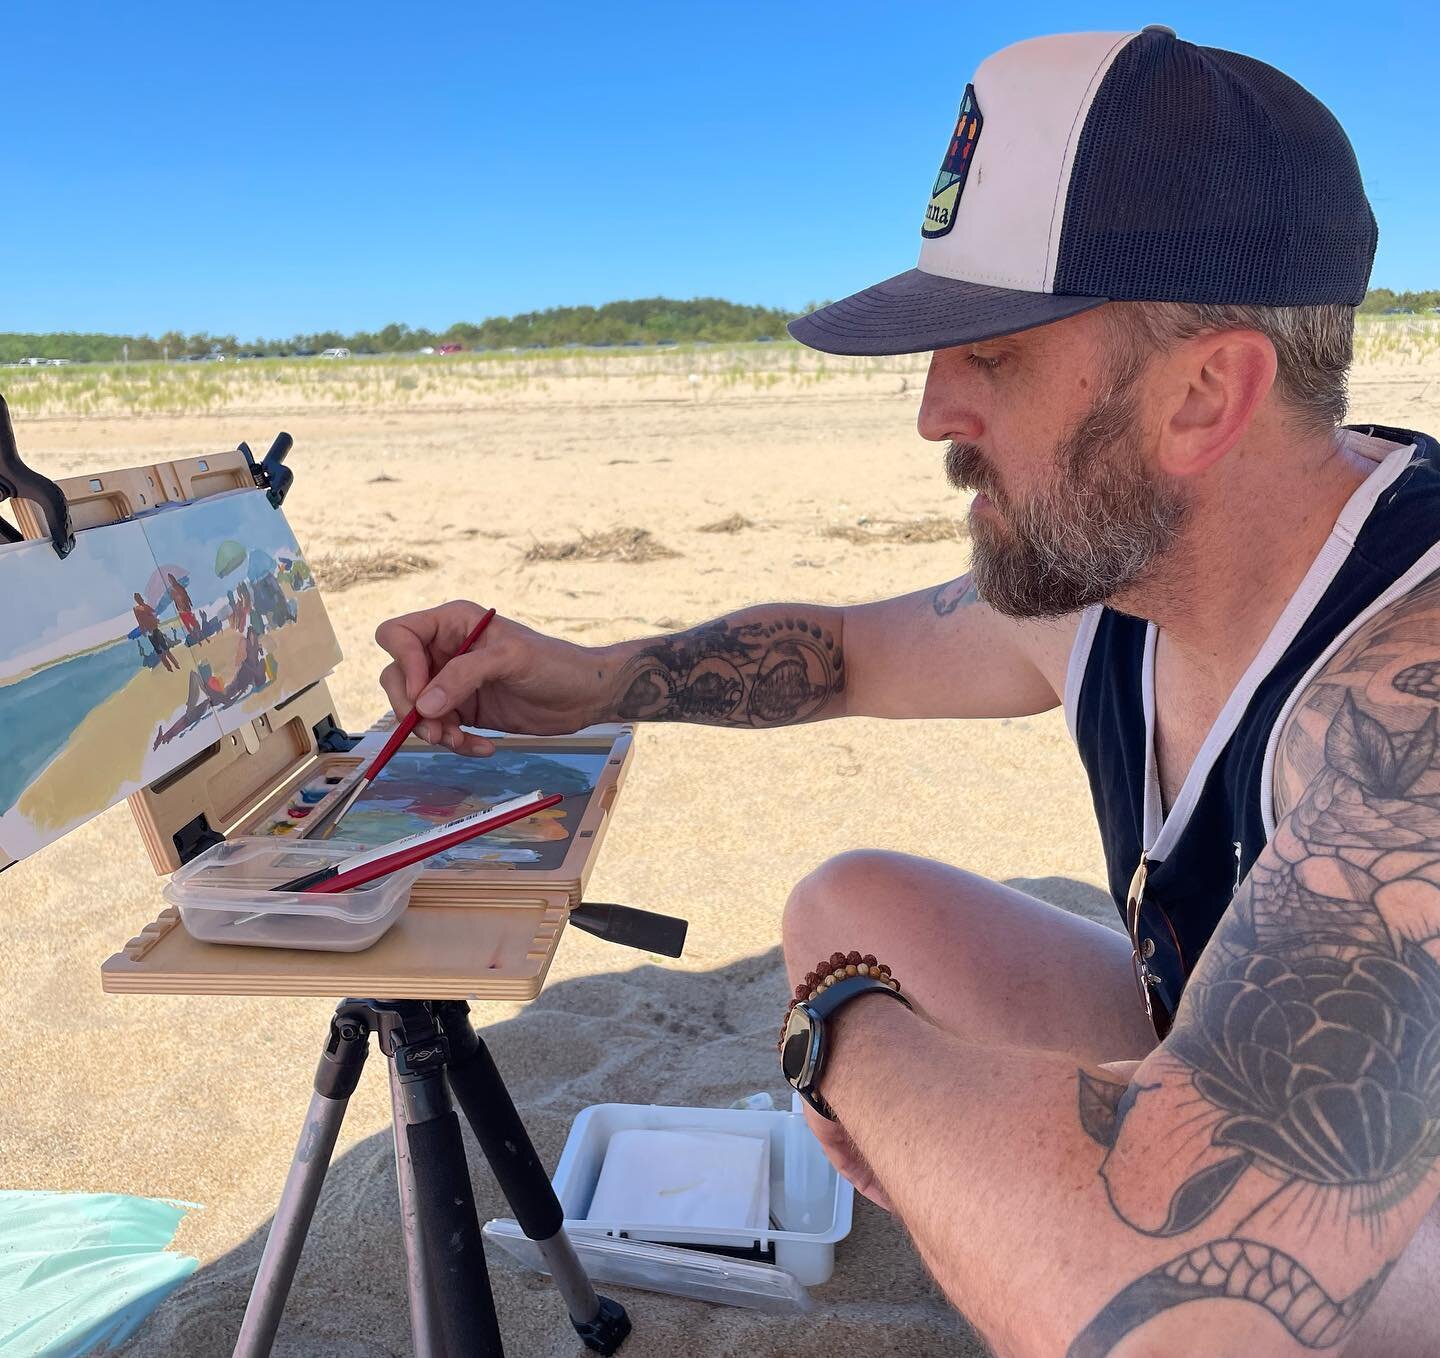 Enjoying the view with some gouache in my sketchbook. I &ldquo;repurposed&rdquo; my @newwaveart Ugo easel from oil to gouache and it was amazing! This is my new favorite use for the medium Ugo easel. 

#landscapepainting 
#sketchbook 
#gouachepaintin